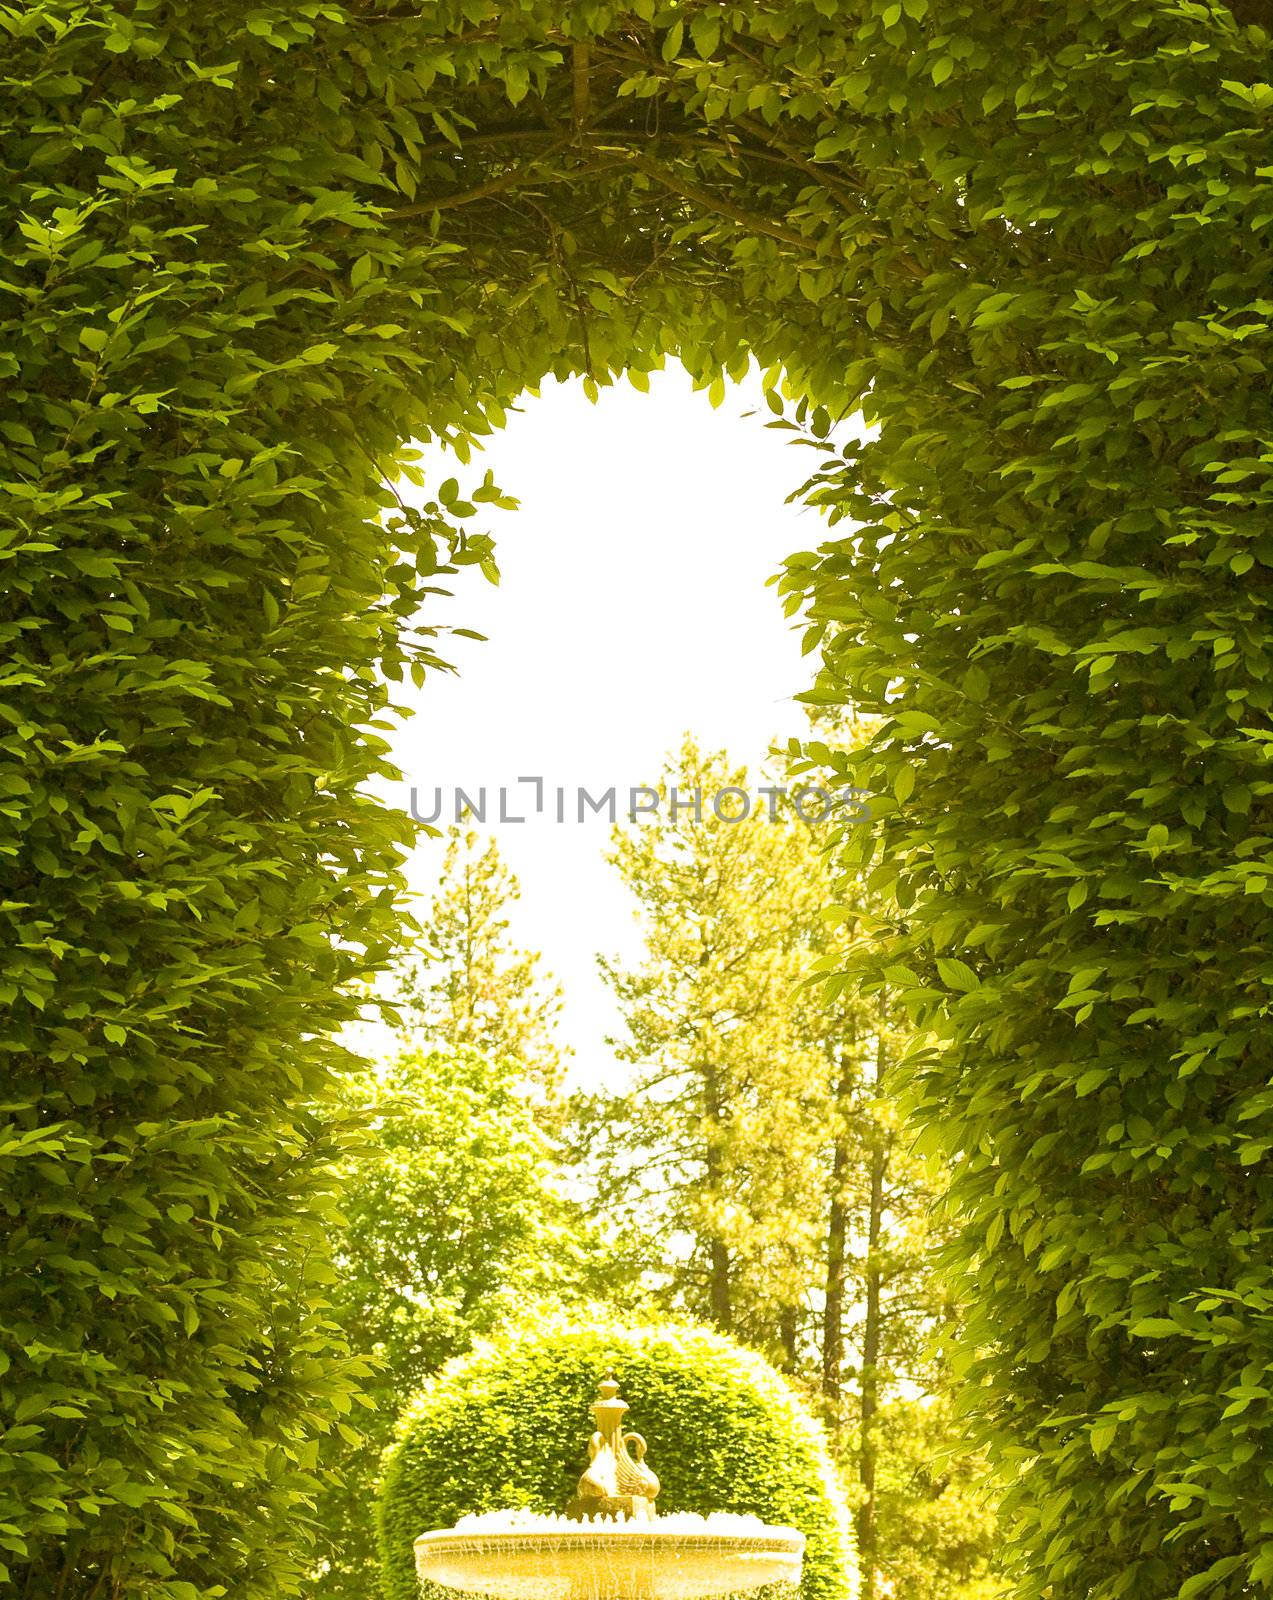 Outdoor Park Archways over a Paved Path on a Sunny Day